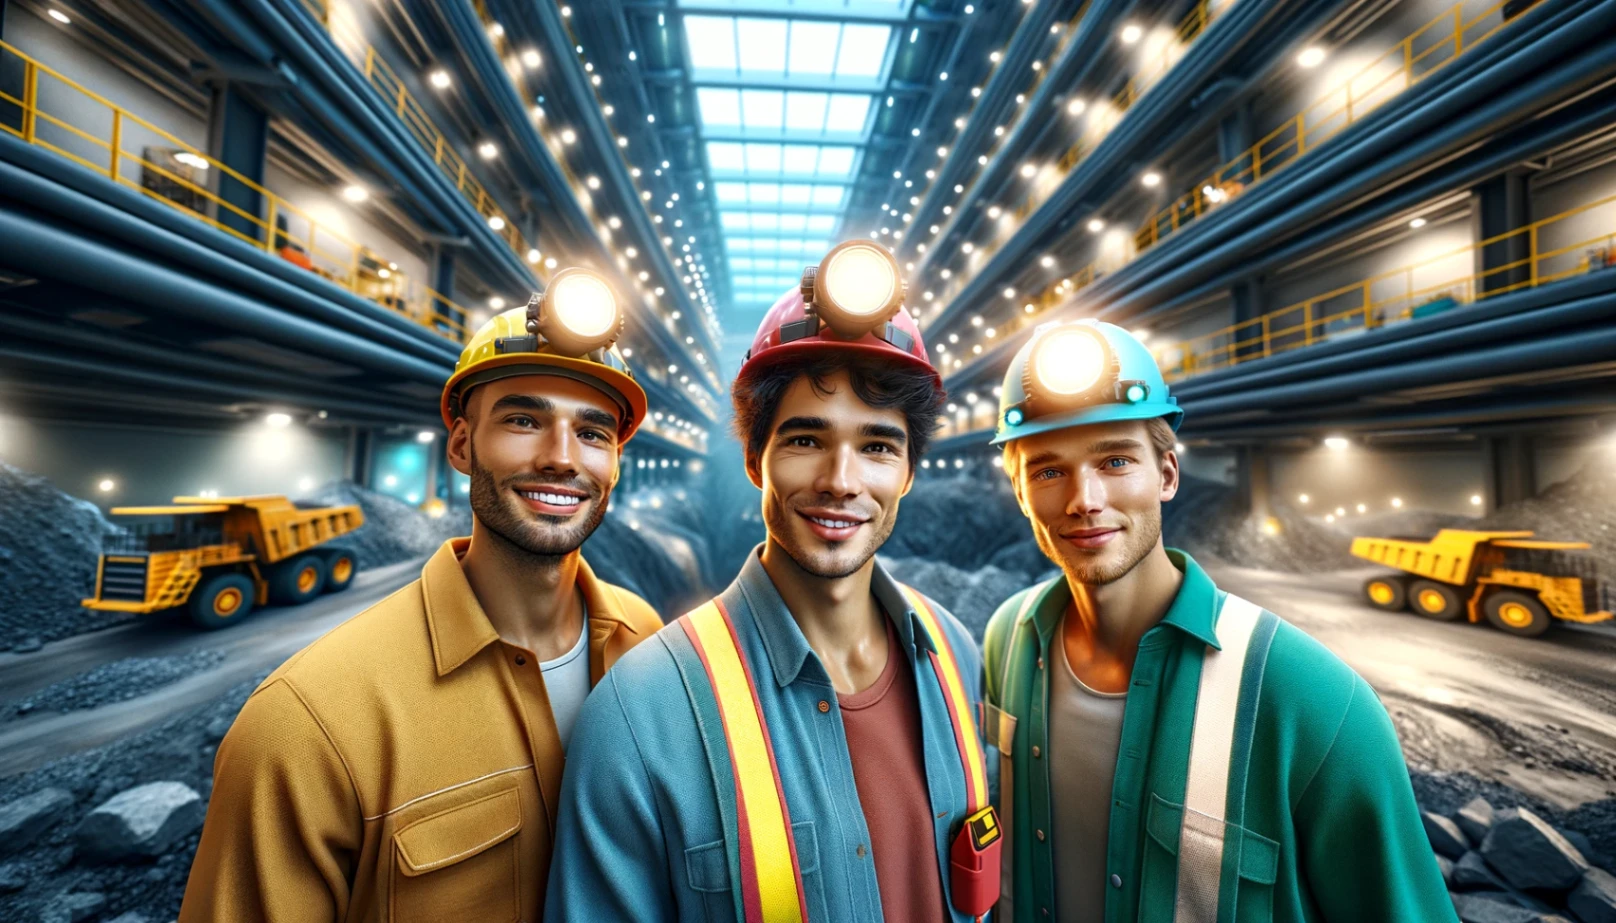 Explore Mining Sector Jobs: Part-Time Opportunities With Competitive Pay starting at $25/hour